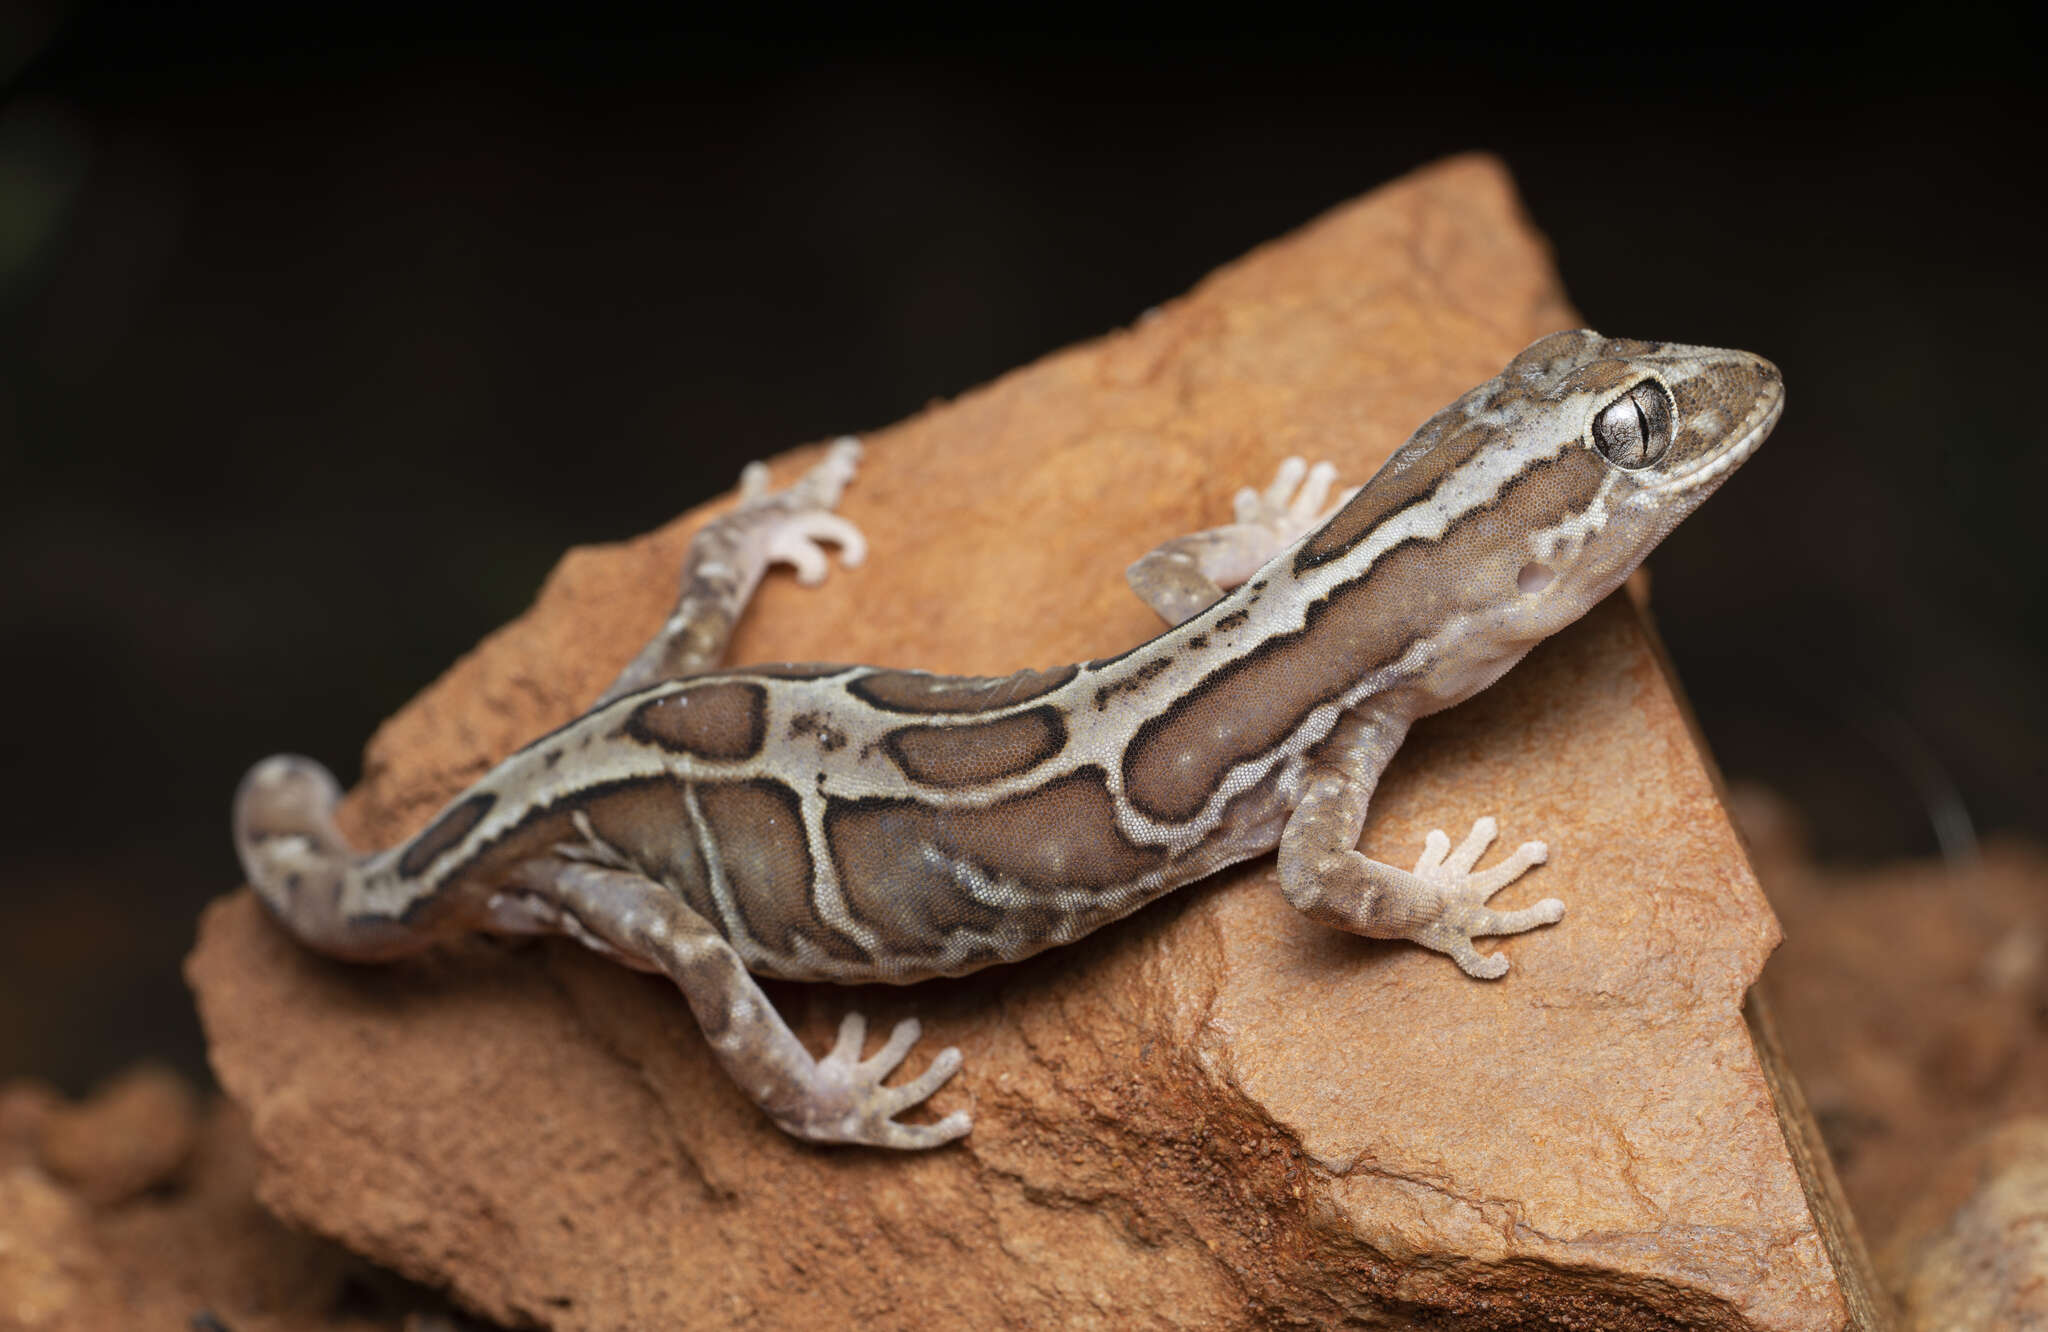 Image of Box-patterned Gecko